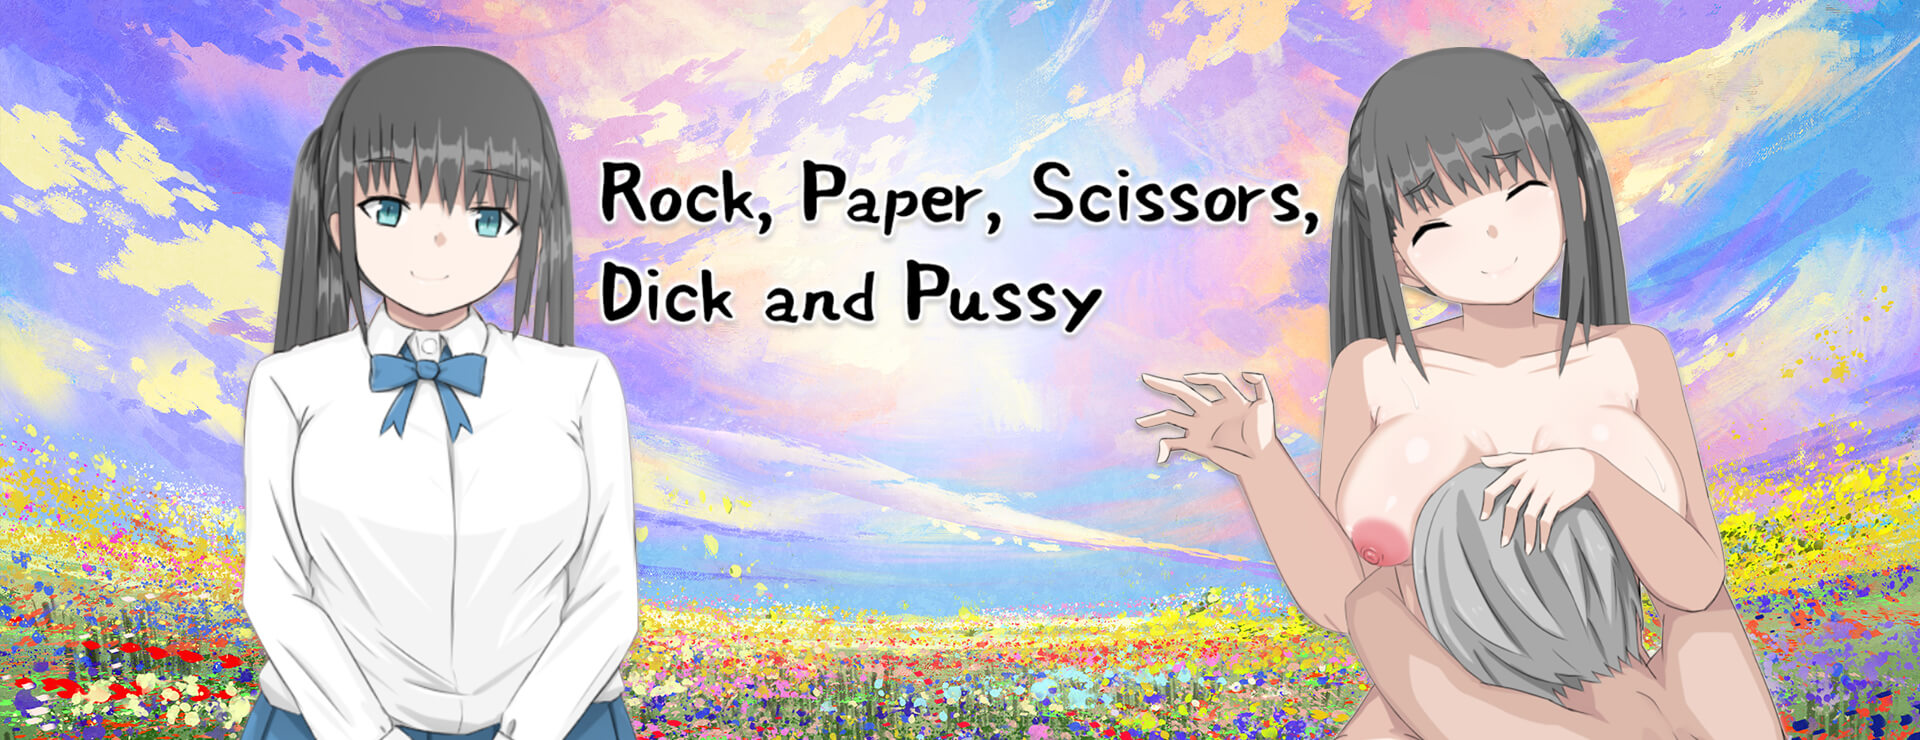 Rock, Paper, Scissors, Dick and Pussy - Casual Juego